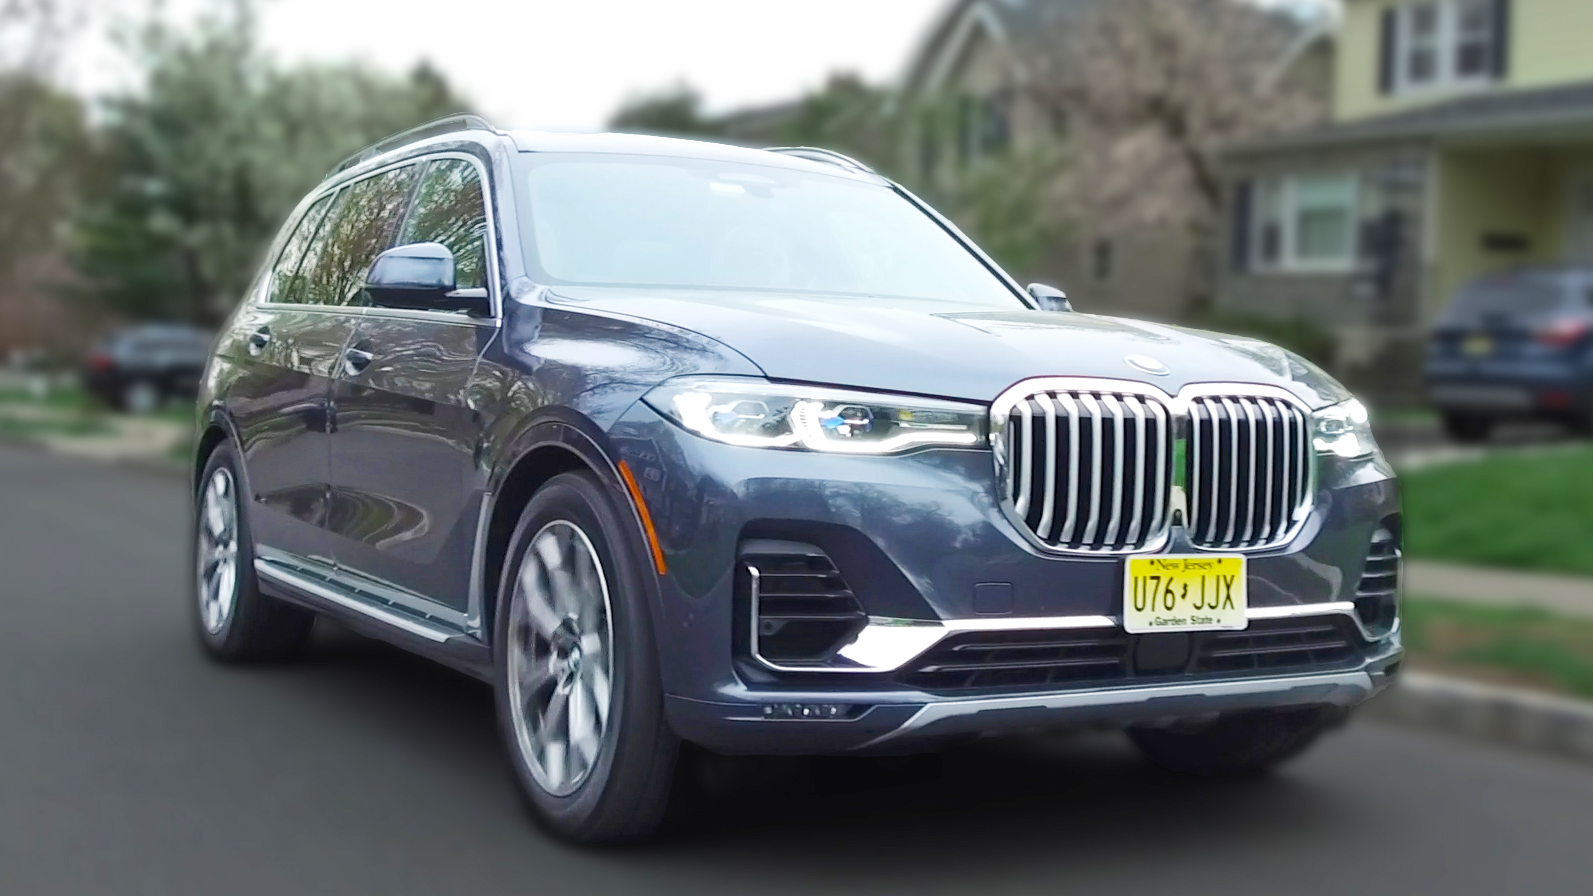 Real Reviews | Are The BMW X7 Tech Features Helpful Or Gimmicky?